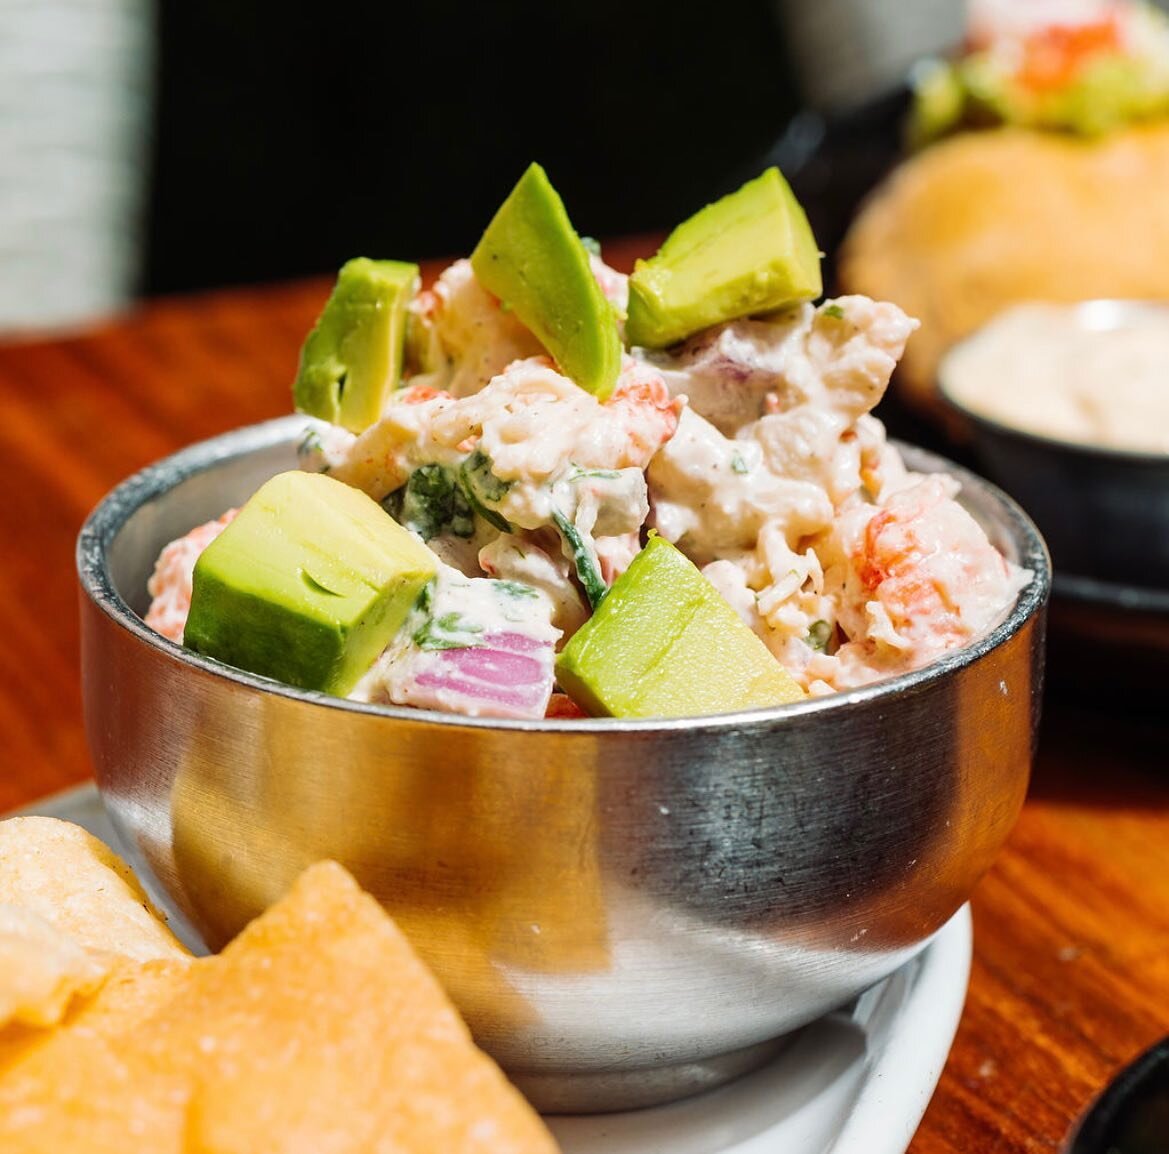 Anytime is a good time for ceviche. Double tap if you agree 😋

Take a dip into our Langoustine De Coco Ceviche! 
📸: langoustine tails marinated in a mix of citrus juices &amp; coconut milk with ginger, red bell pepper, red onion, 
avocado &amp; cil